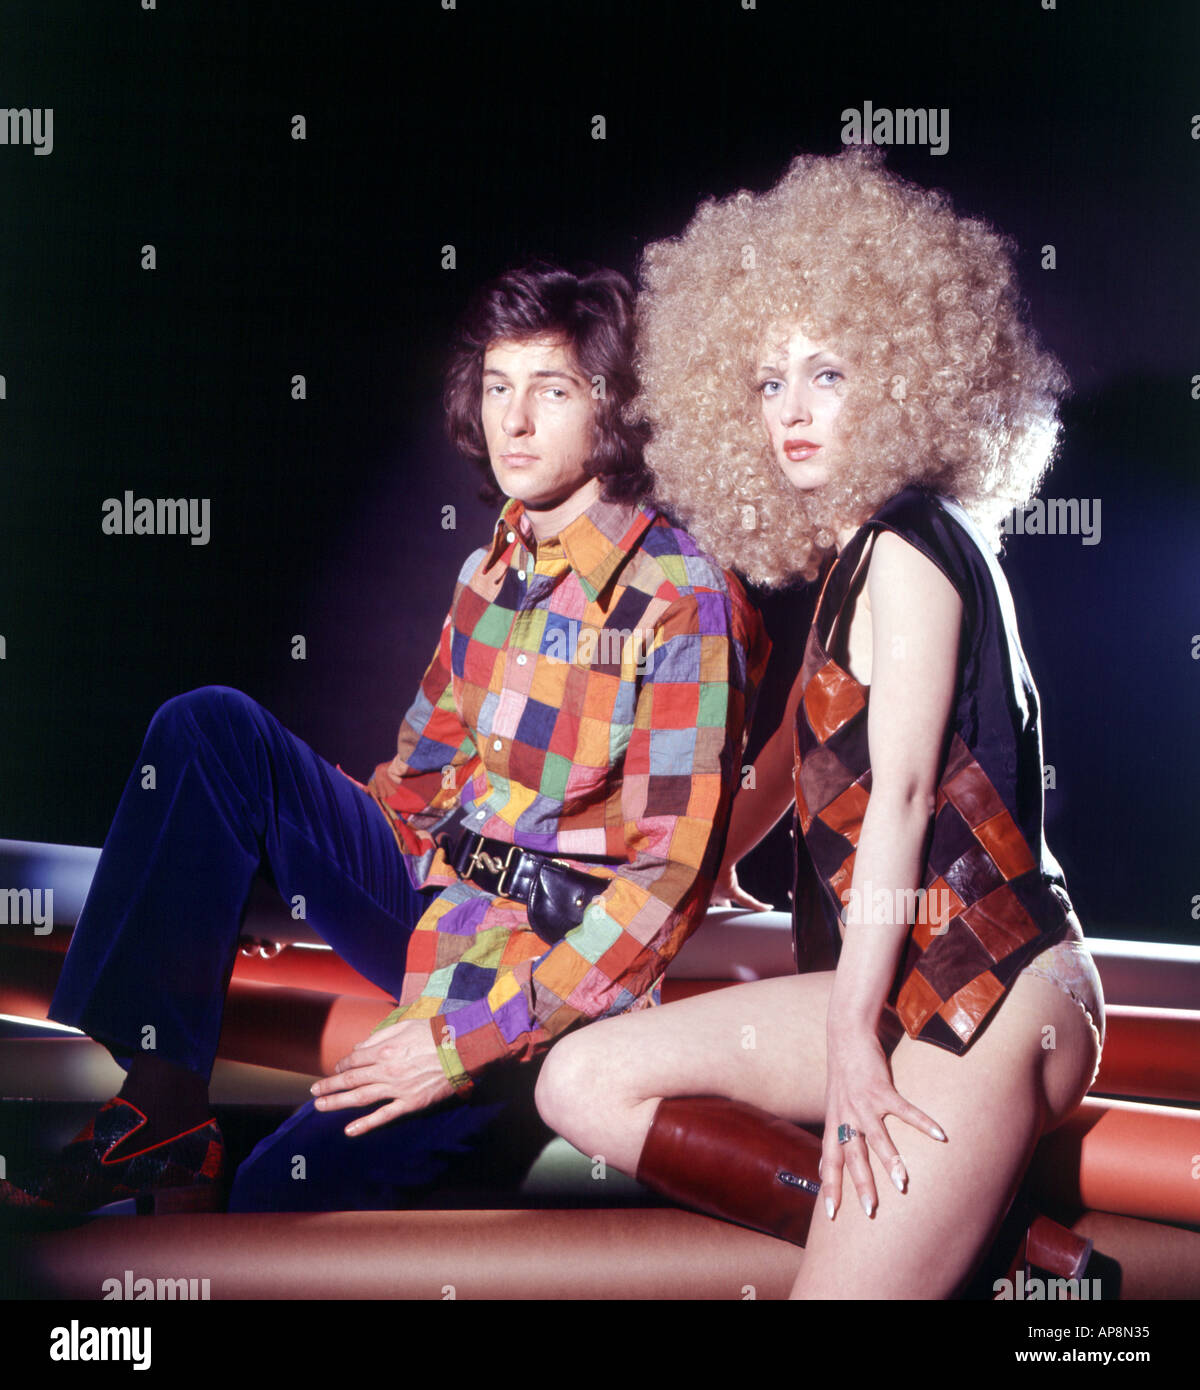 1970s couple posing in patchwork outfits Stock Photo